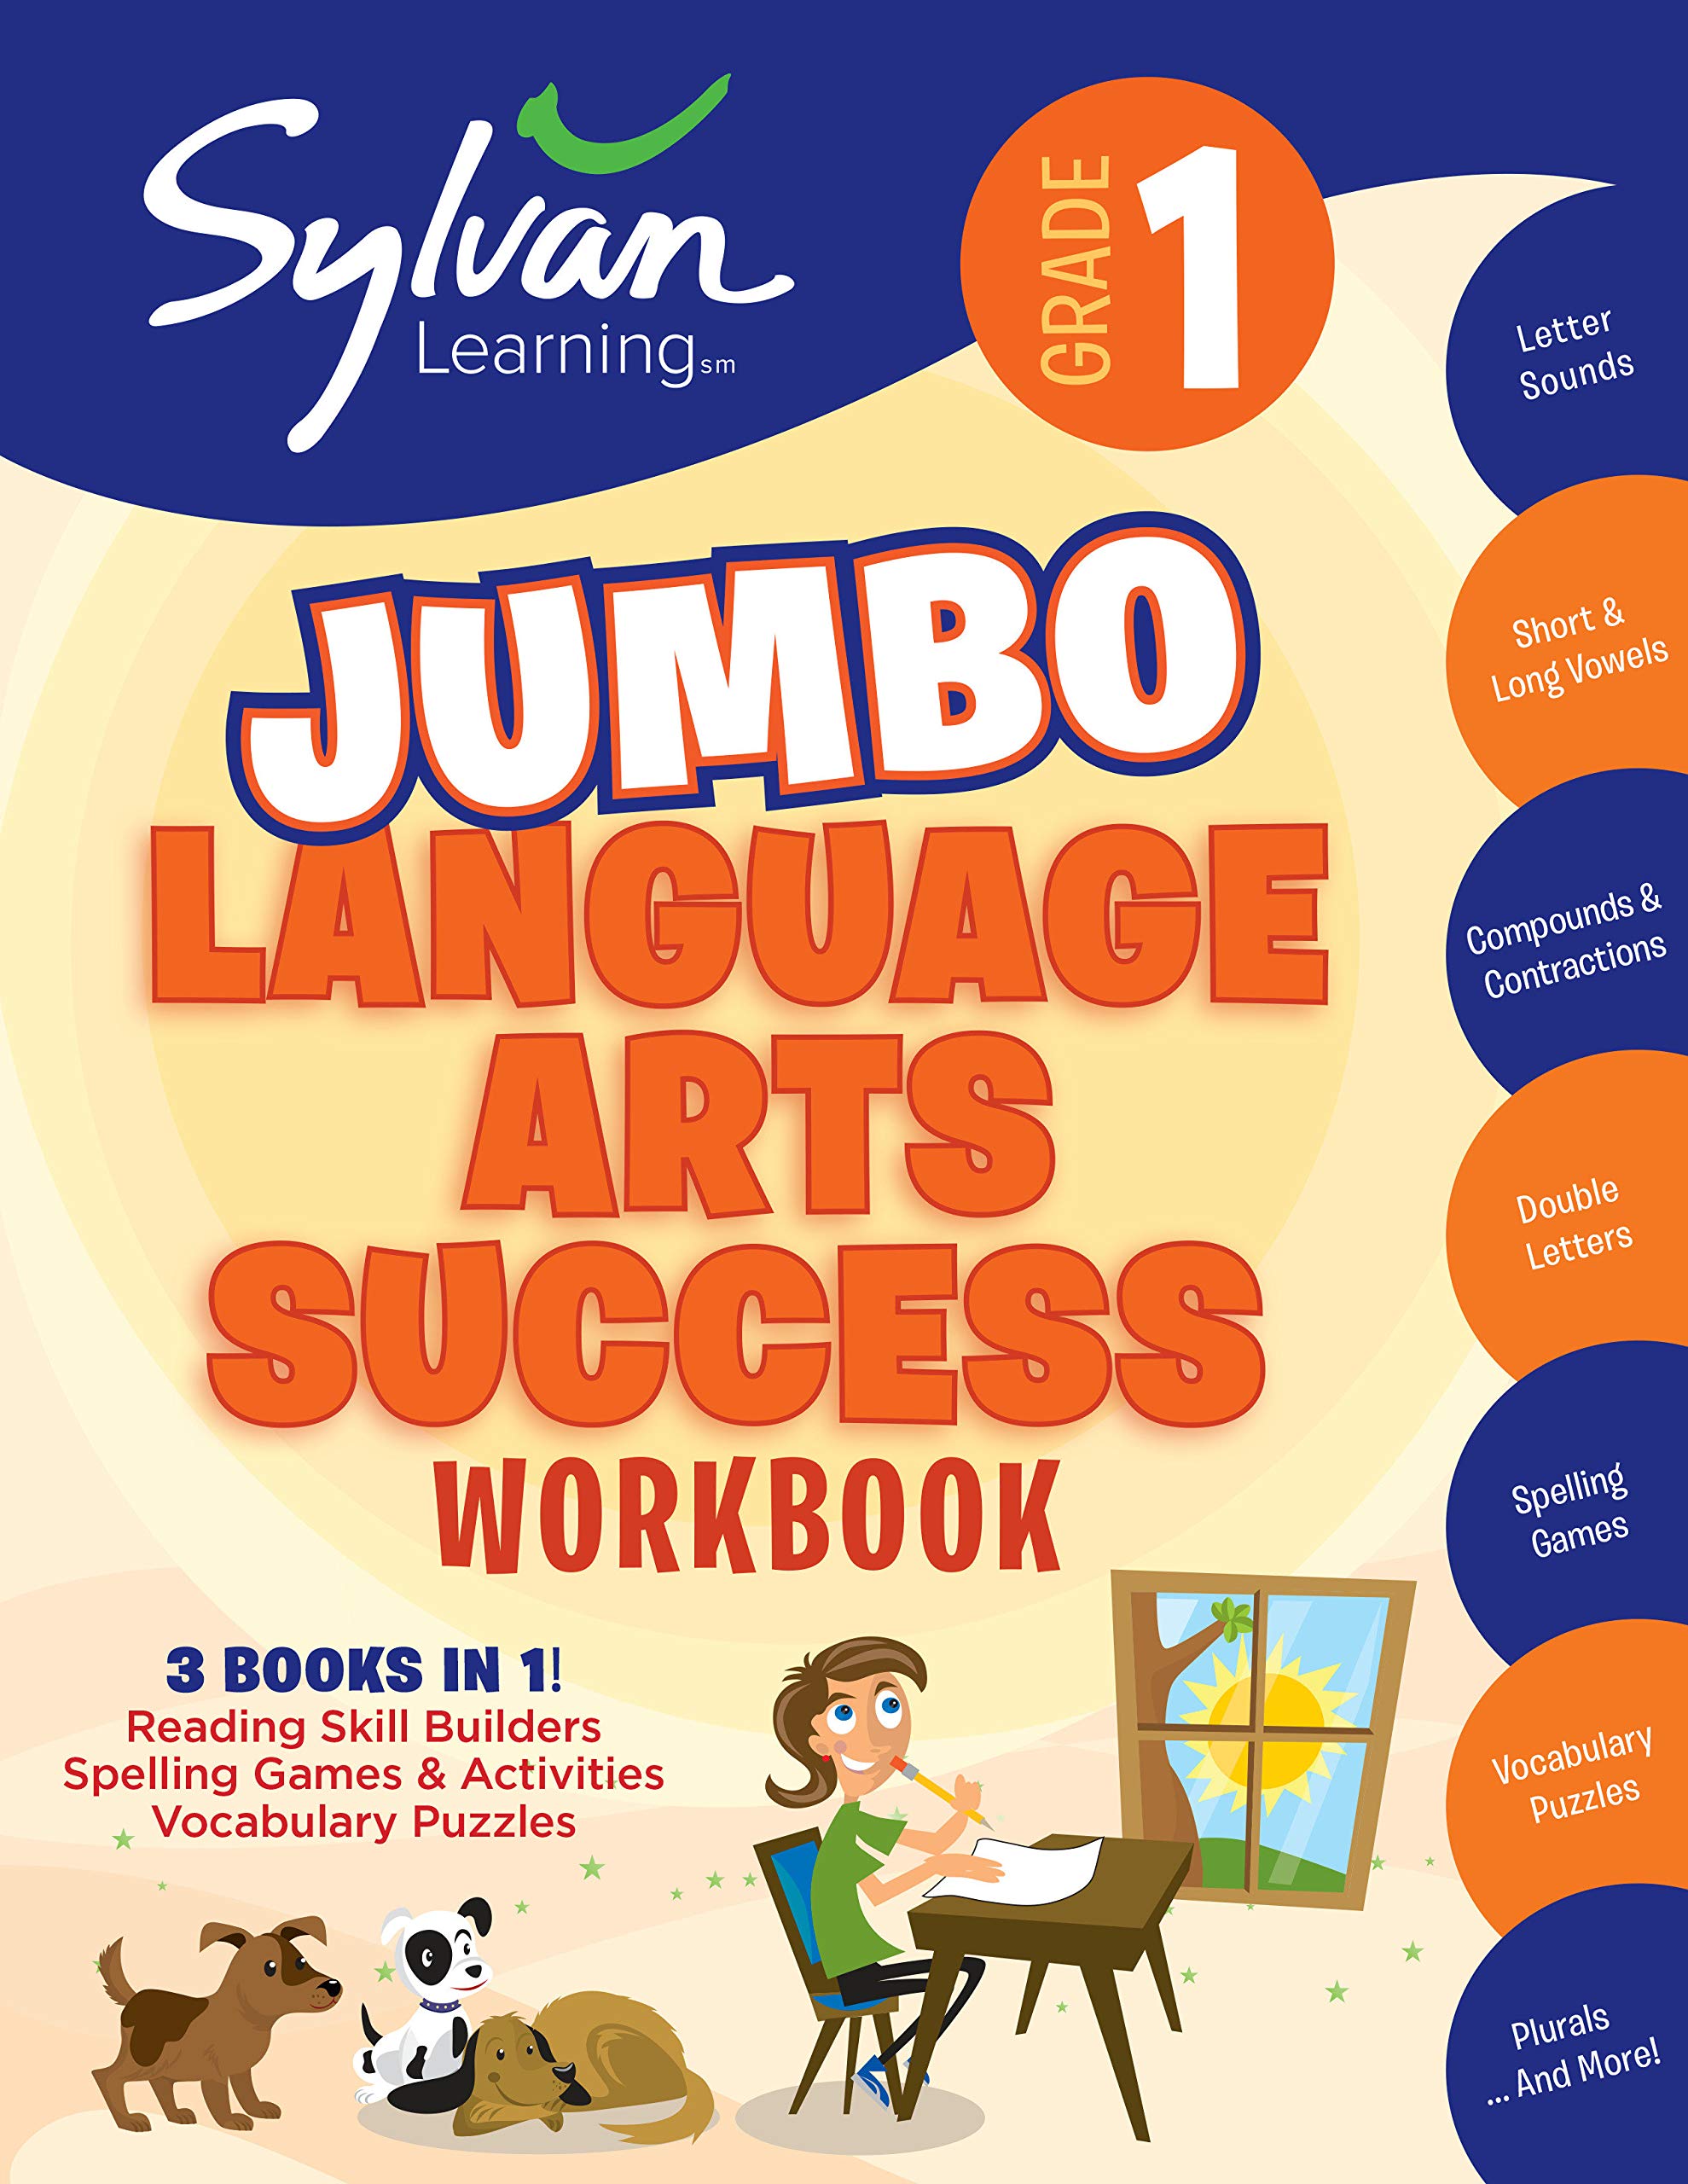 1st Grade Jumbo Language Arts Success Workbook: 3 Books In 1 # Reading Skill Builders, Spellings Games, Vocabulary Puzzles; Acti